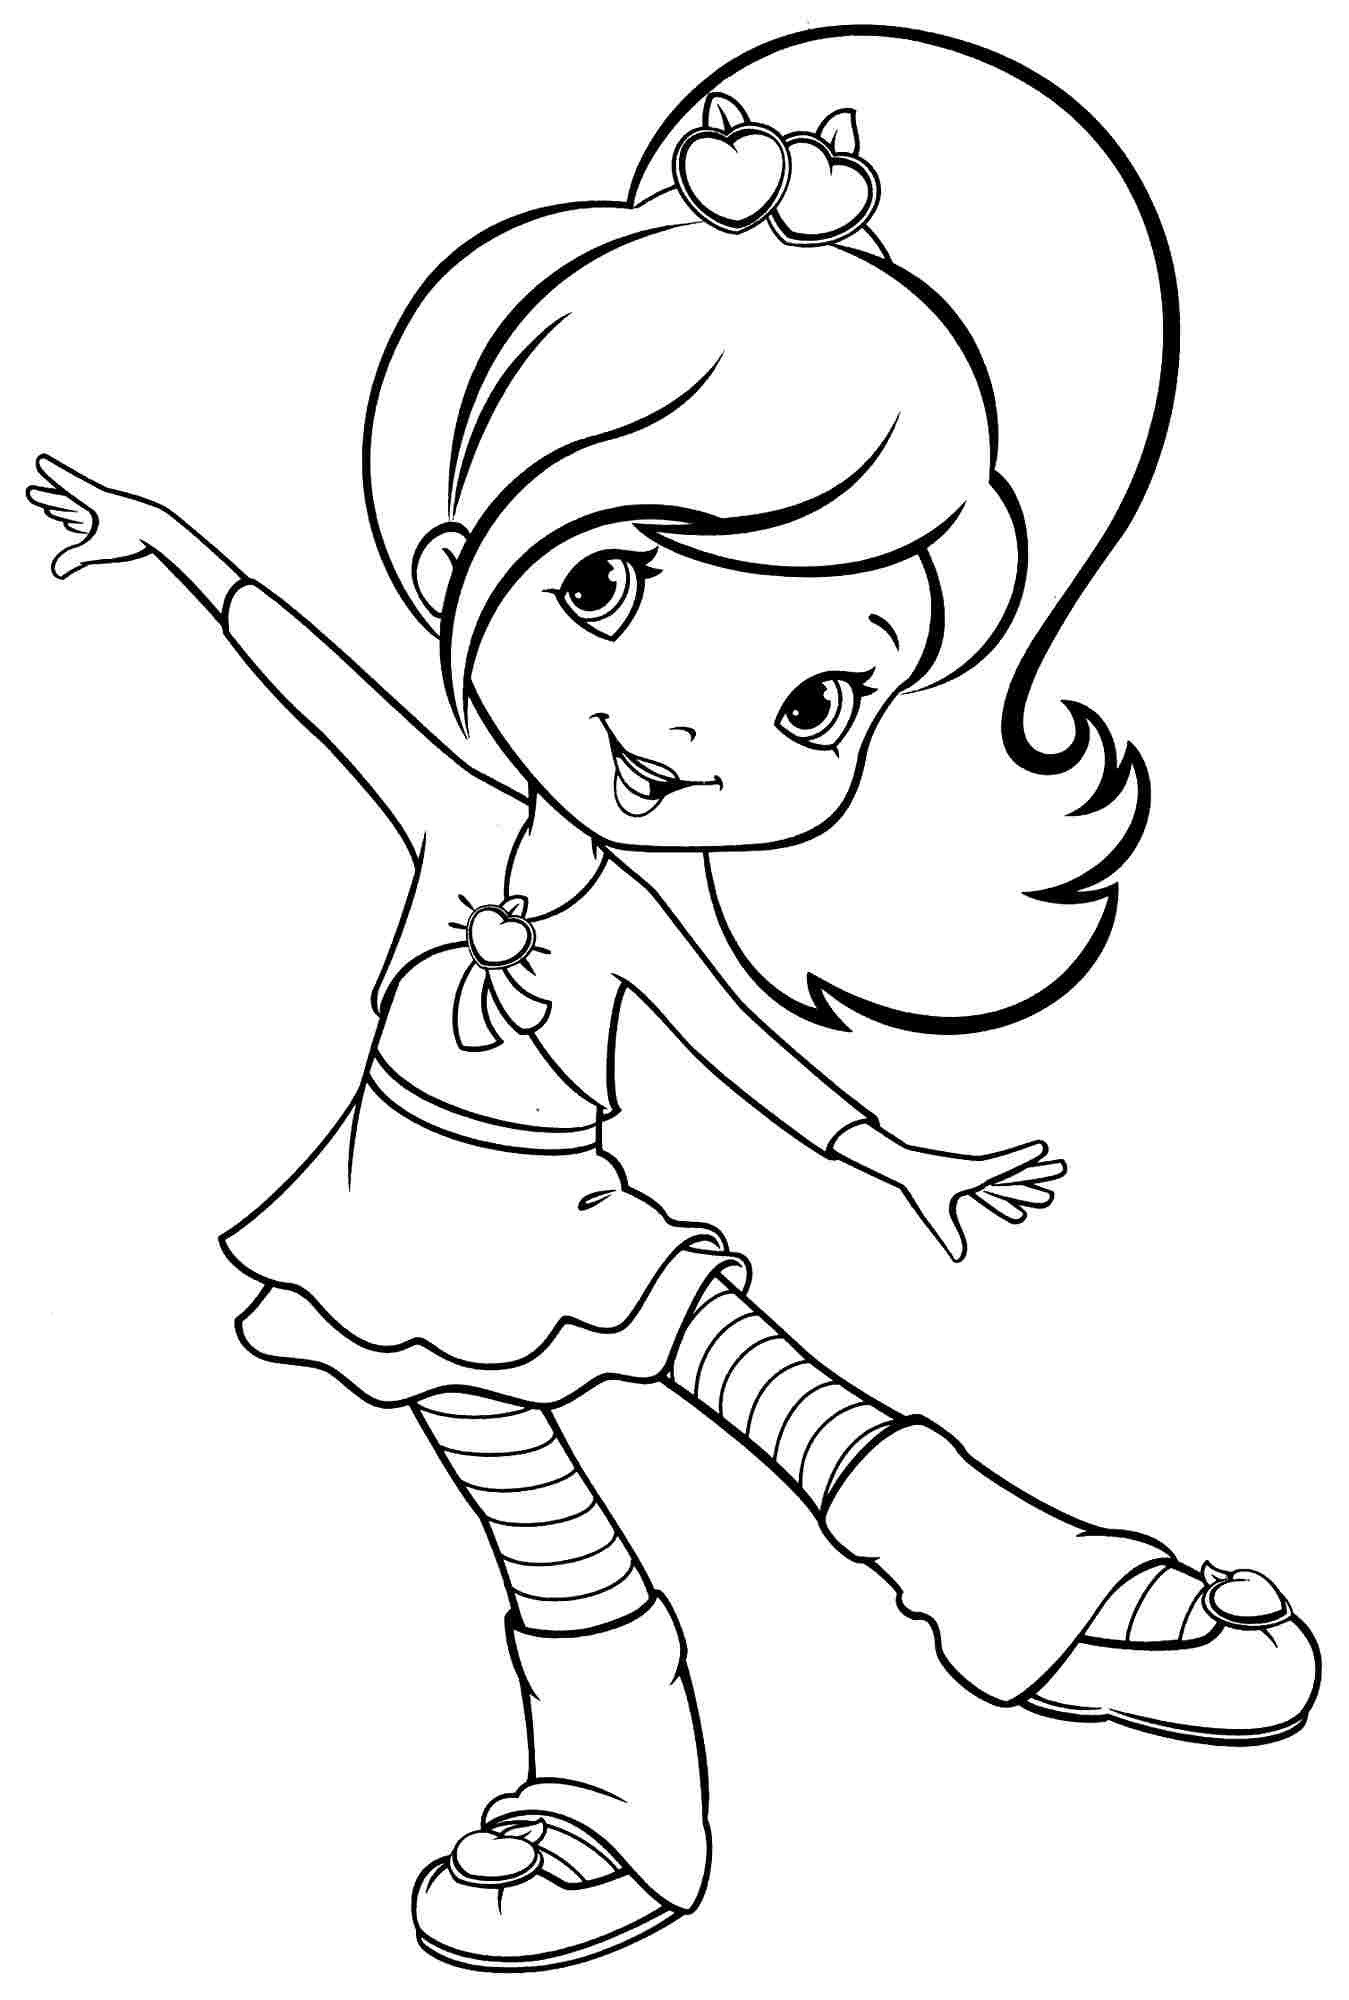 Girl Cartoon Coloring Pages
 Coloring Pages for Girls Best Coloring Pages For Kids